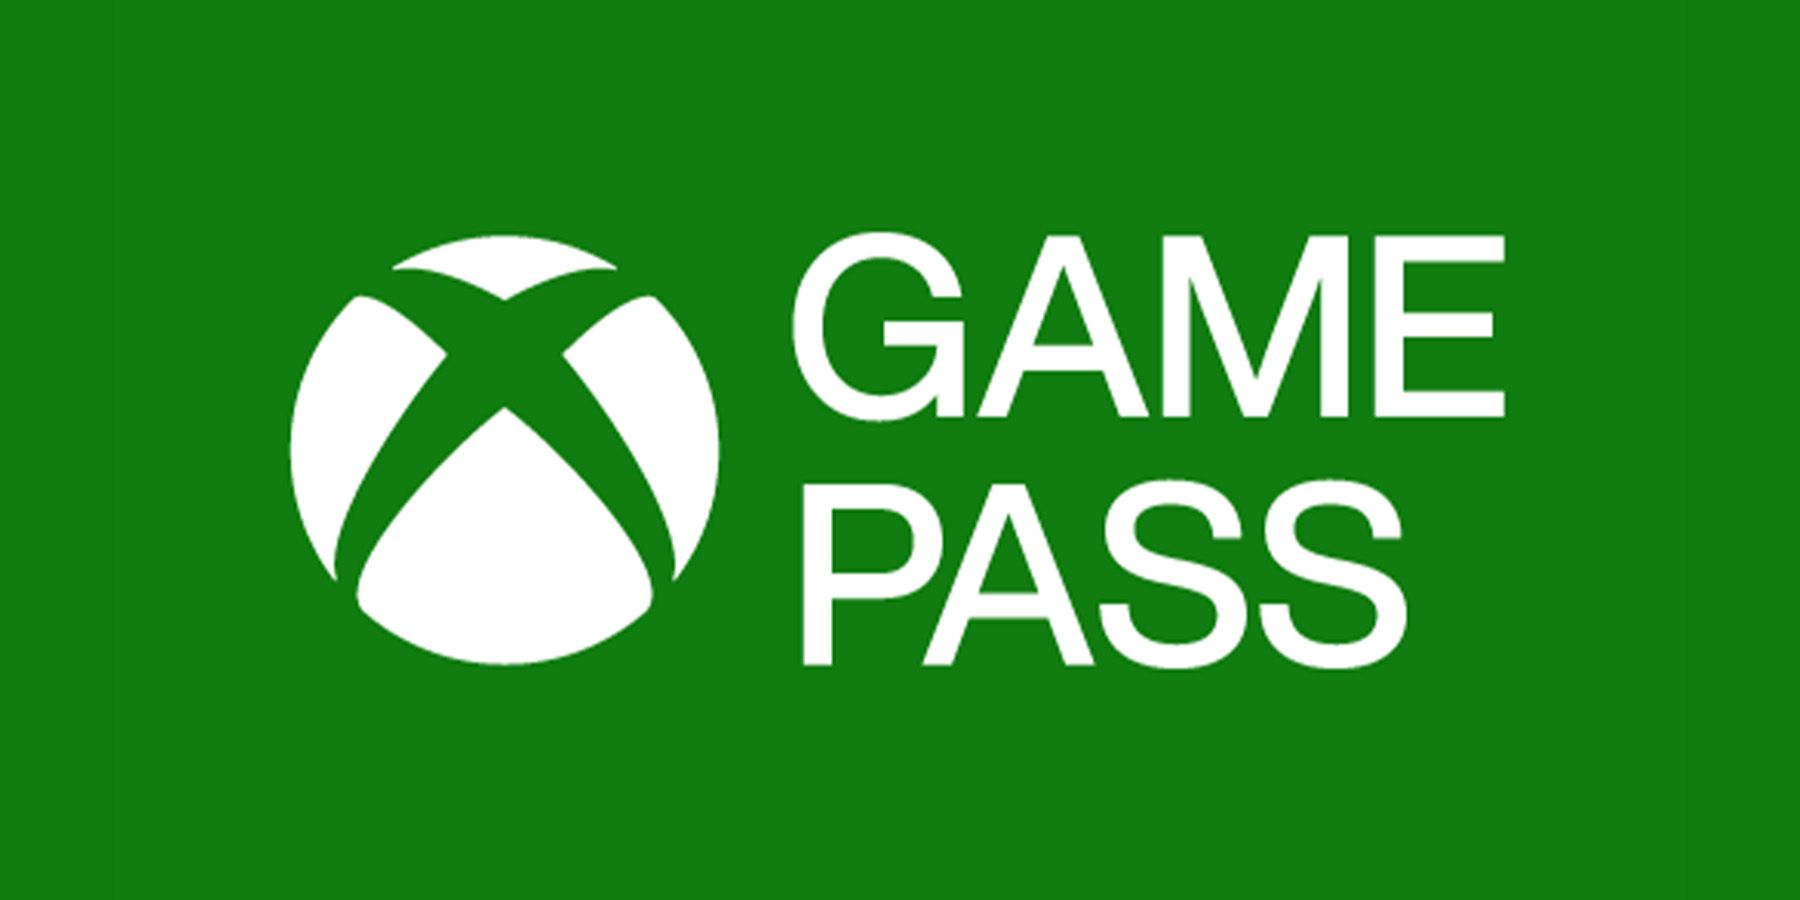 Game Pass logo over green background